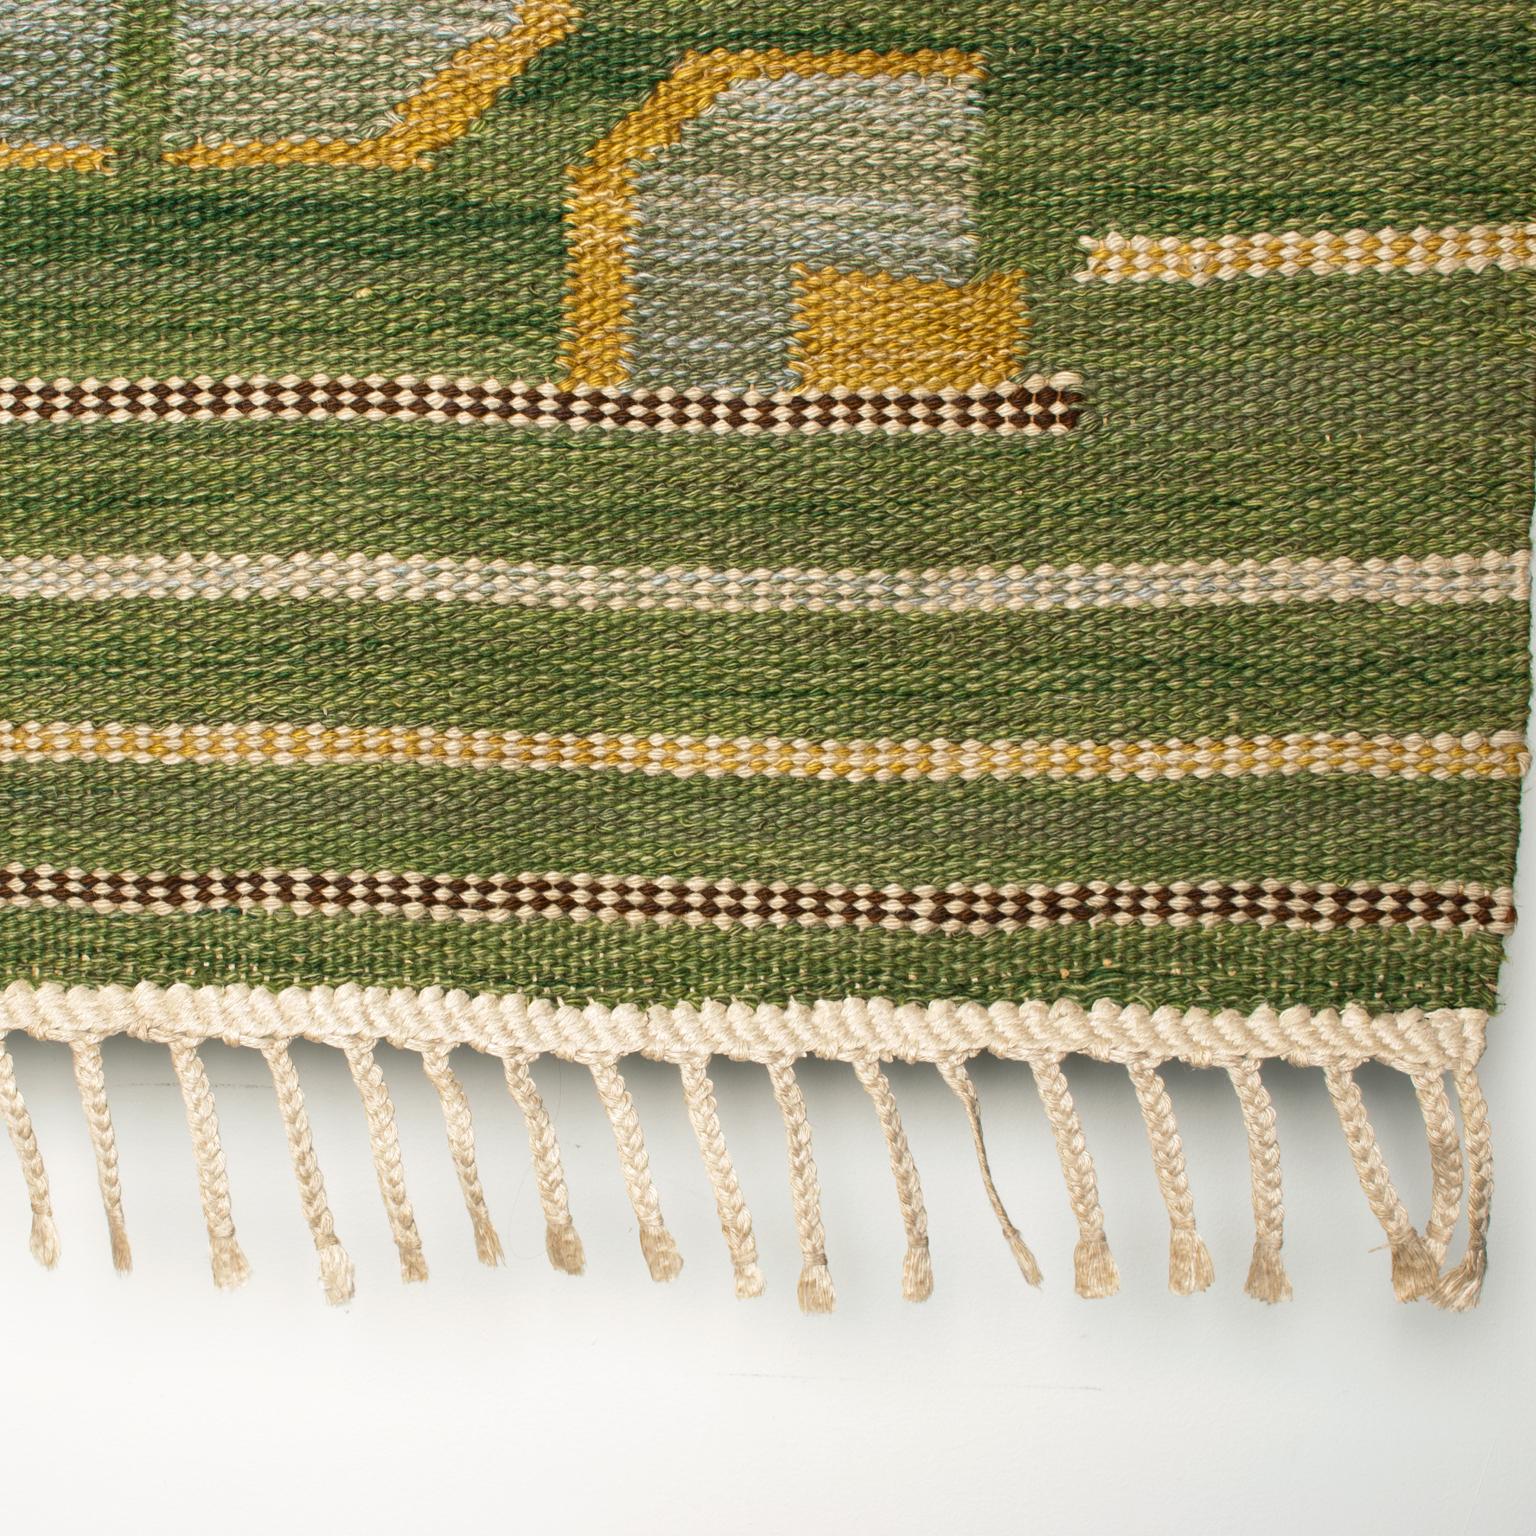 20th Century Scandinavian Modern Flat Weave Rug in Green and Gold Wool For Sale